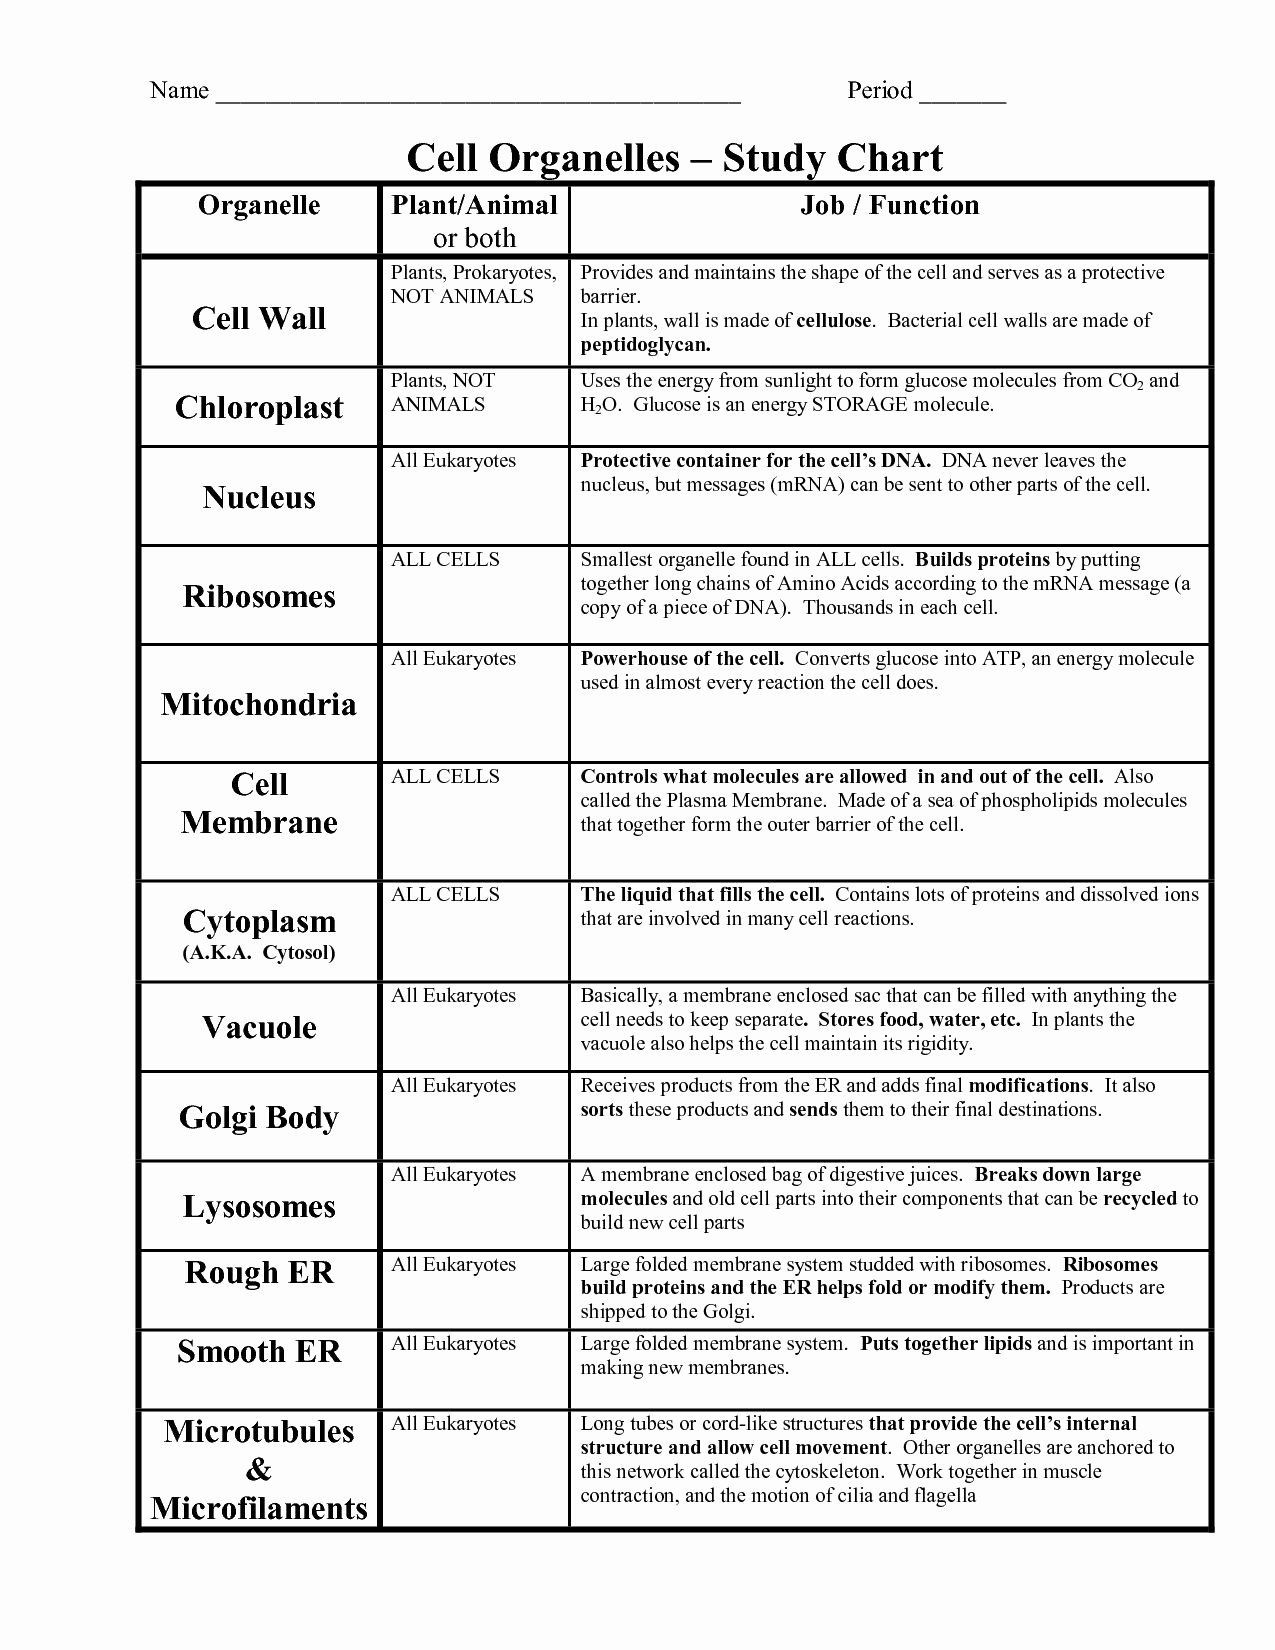 Cells and organelles Worksheet 50 Dna Replication Worksheet Answers In 2020